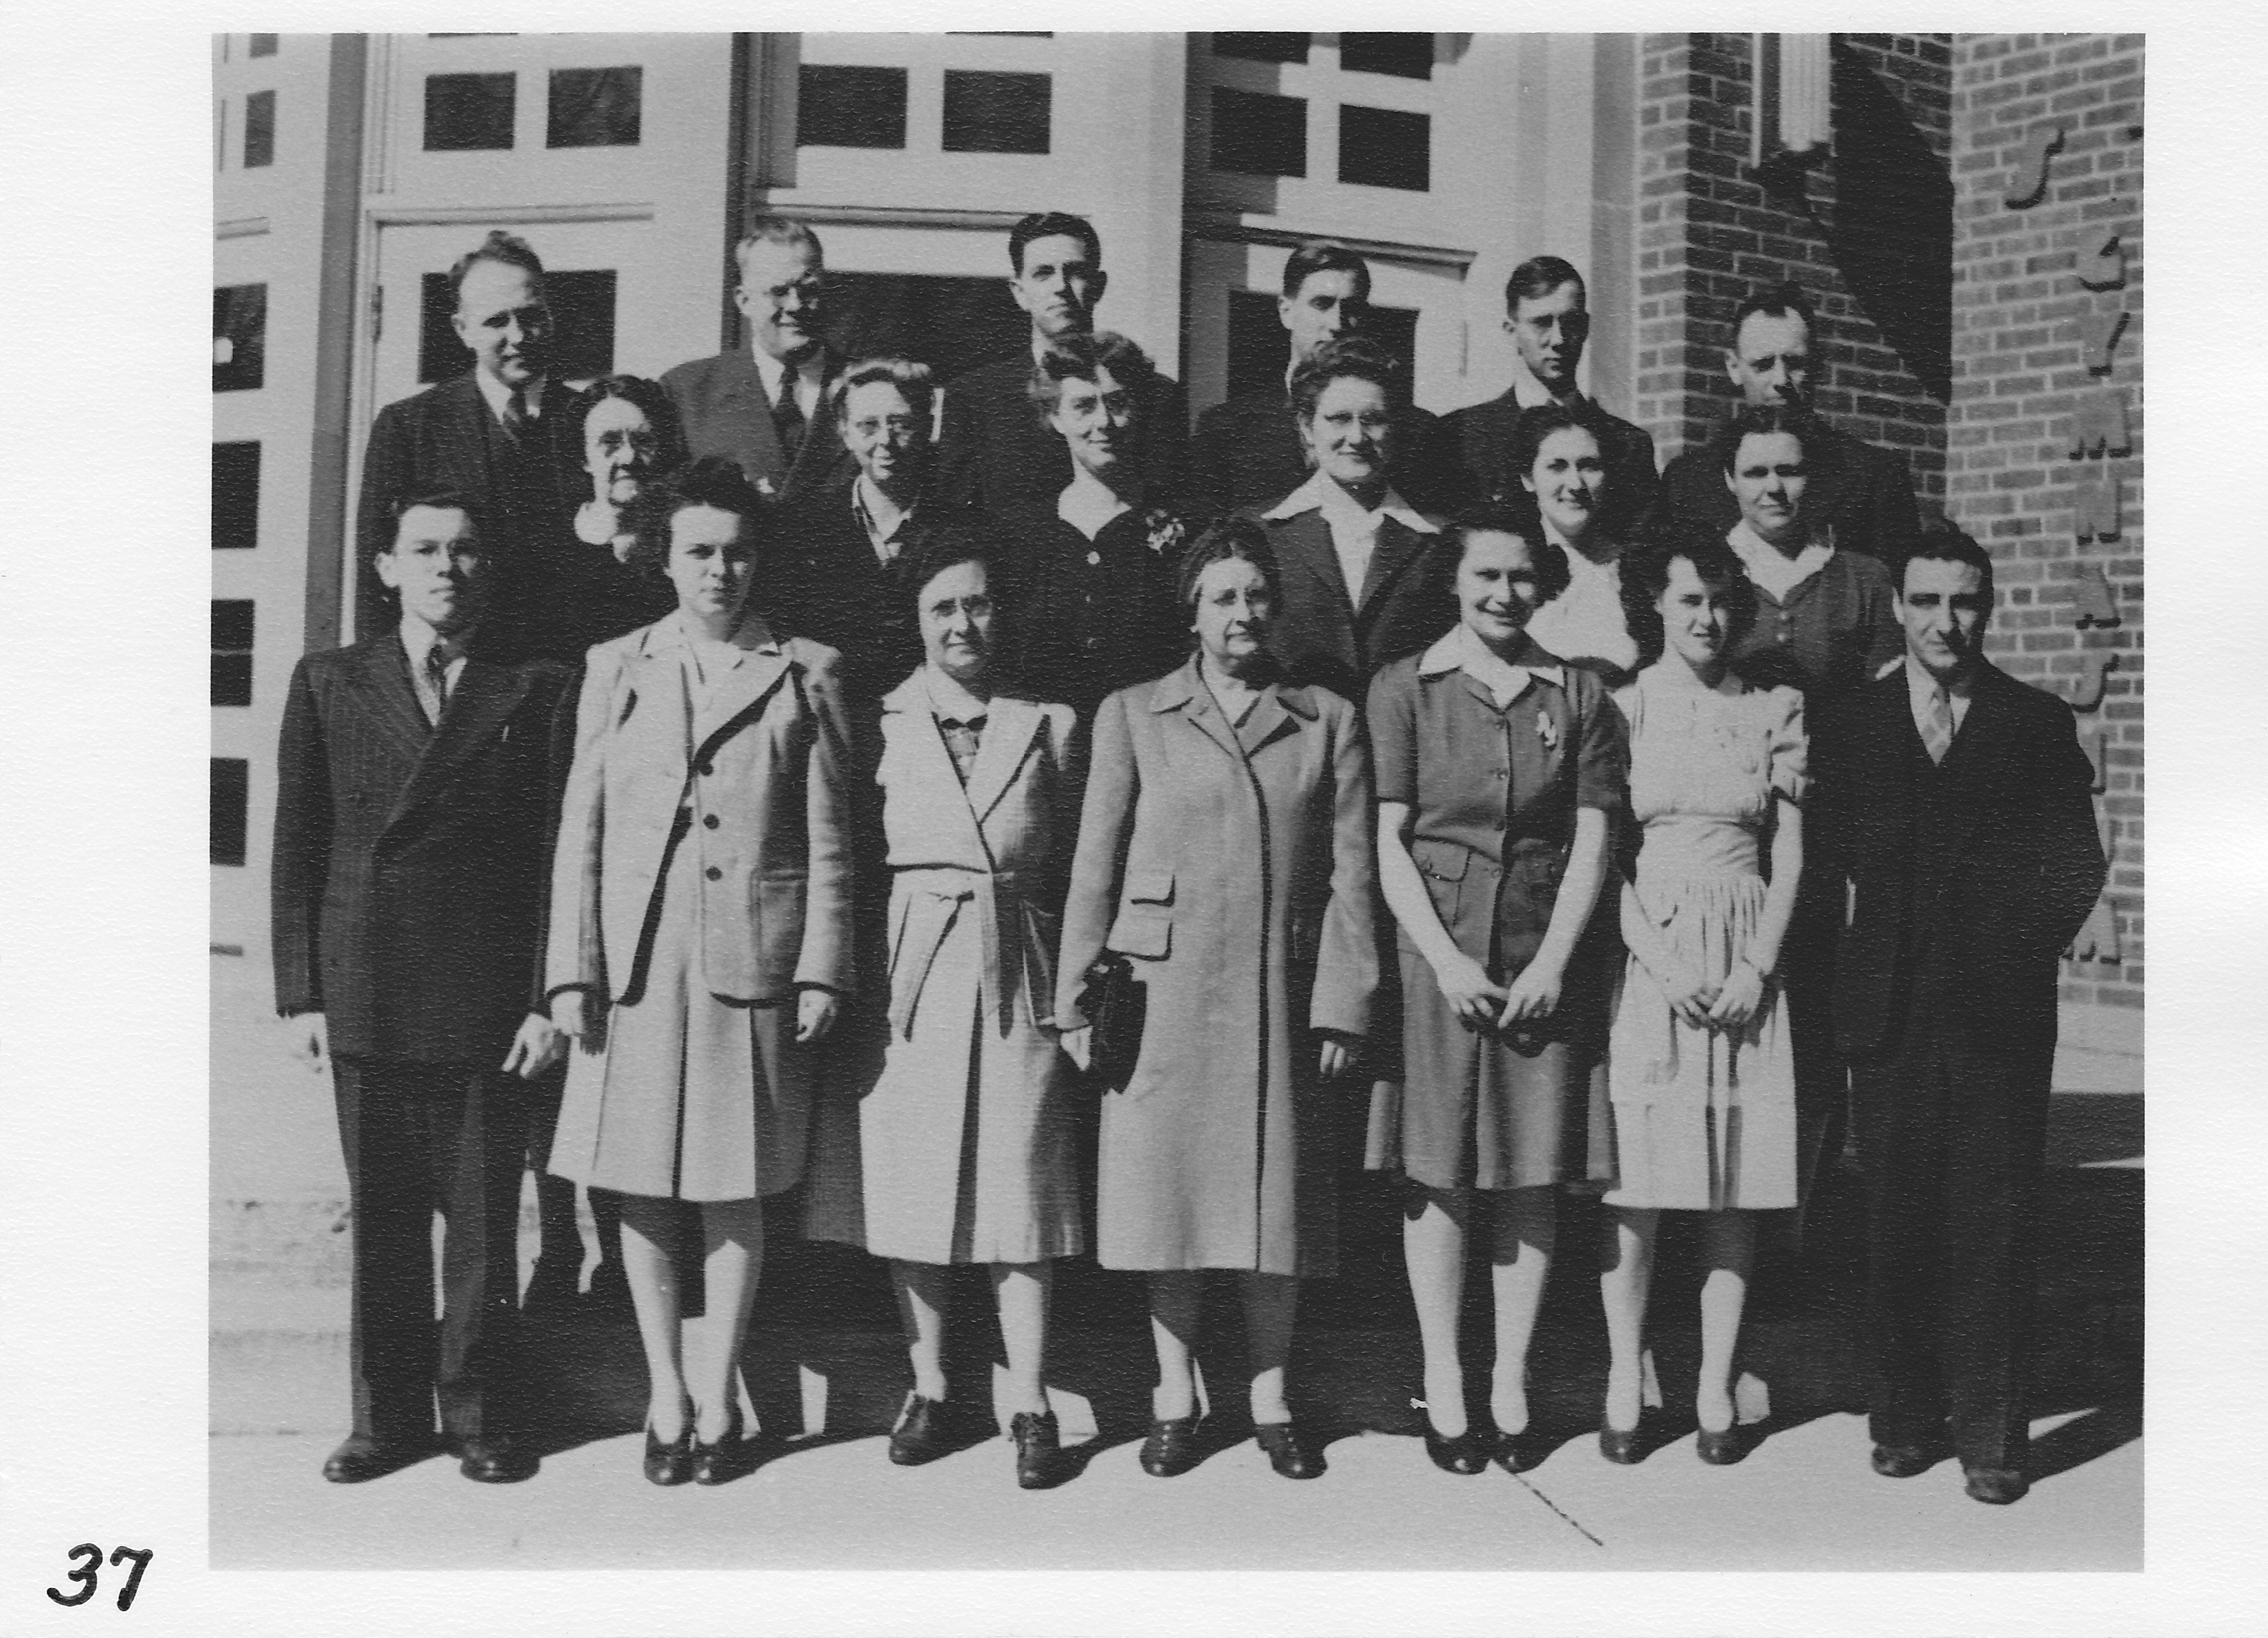 Morenci High School teachers in front of Stair Gymnasium.  Photo about 1943.  Top row (l-r) Henry Geisler, ______________, Ross Cox, ______________, Lyle Eggleston, Rex Riley.    Middle row (l-r) Hattie Lang, ______________, Gertrude Van Havel, ______________, ______________, Catherine Garrow.  Front row (l-r) _____________, Rita Chappell, Marie Johnson Butler, Minnie Green, ______________, ______________, ______________.